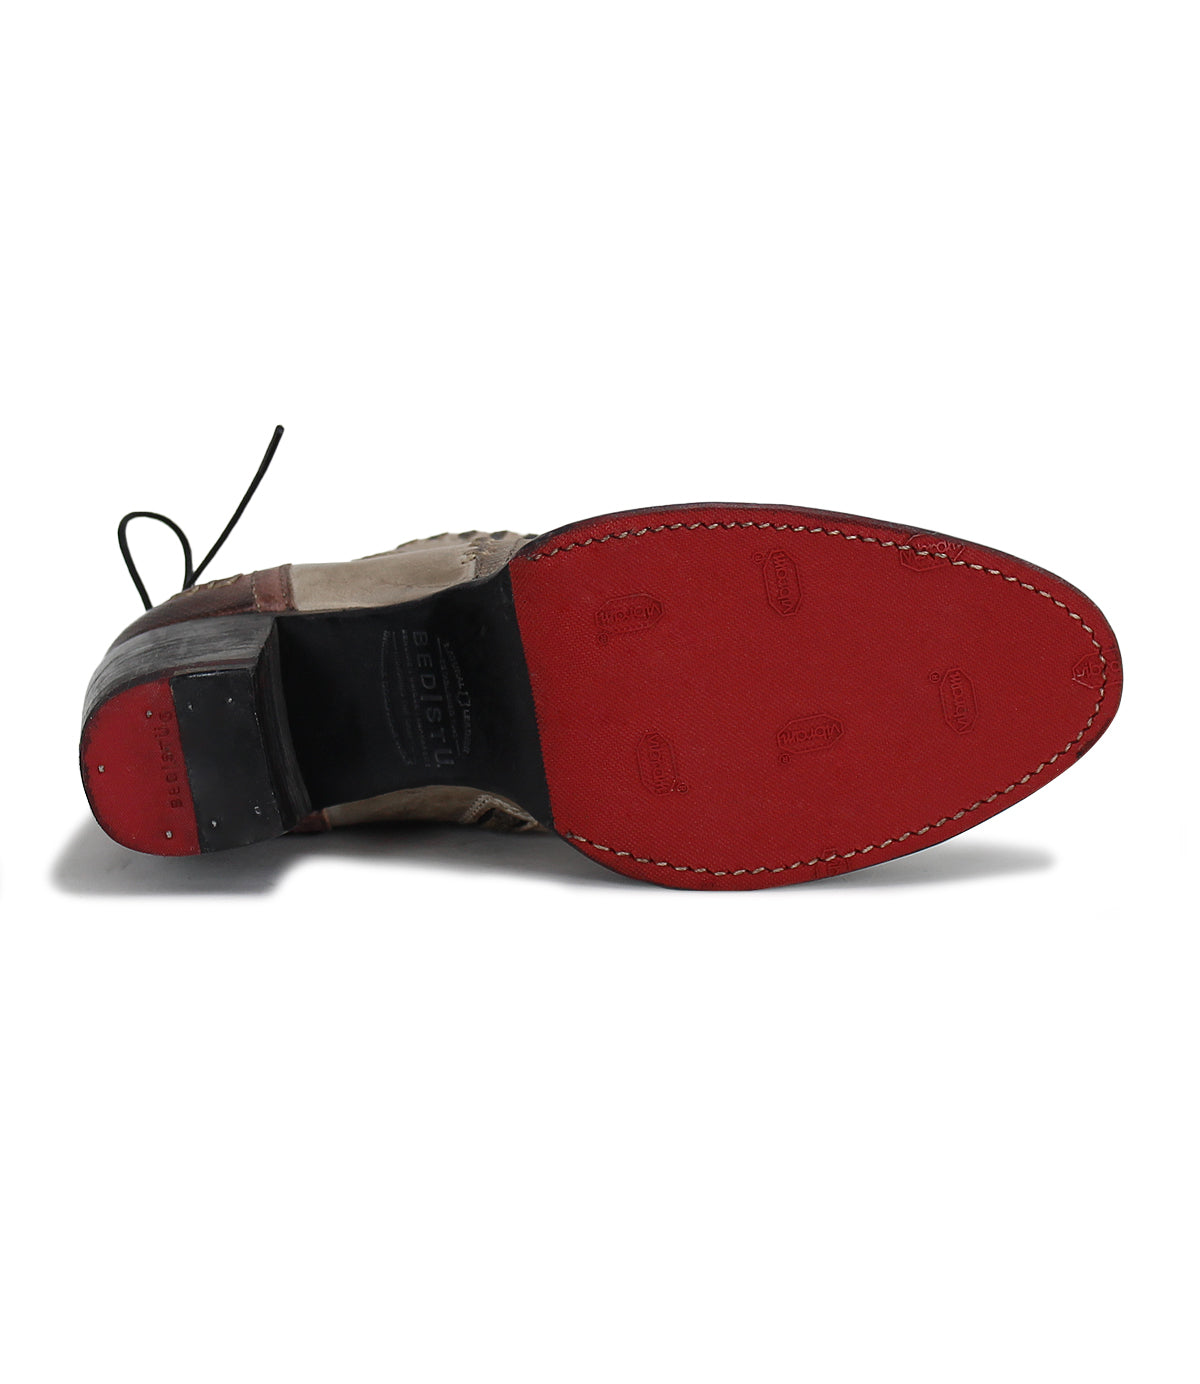 A pair of Bia shoes with red soles on a white background, by Bed Stu.